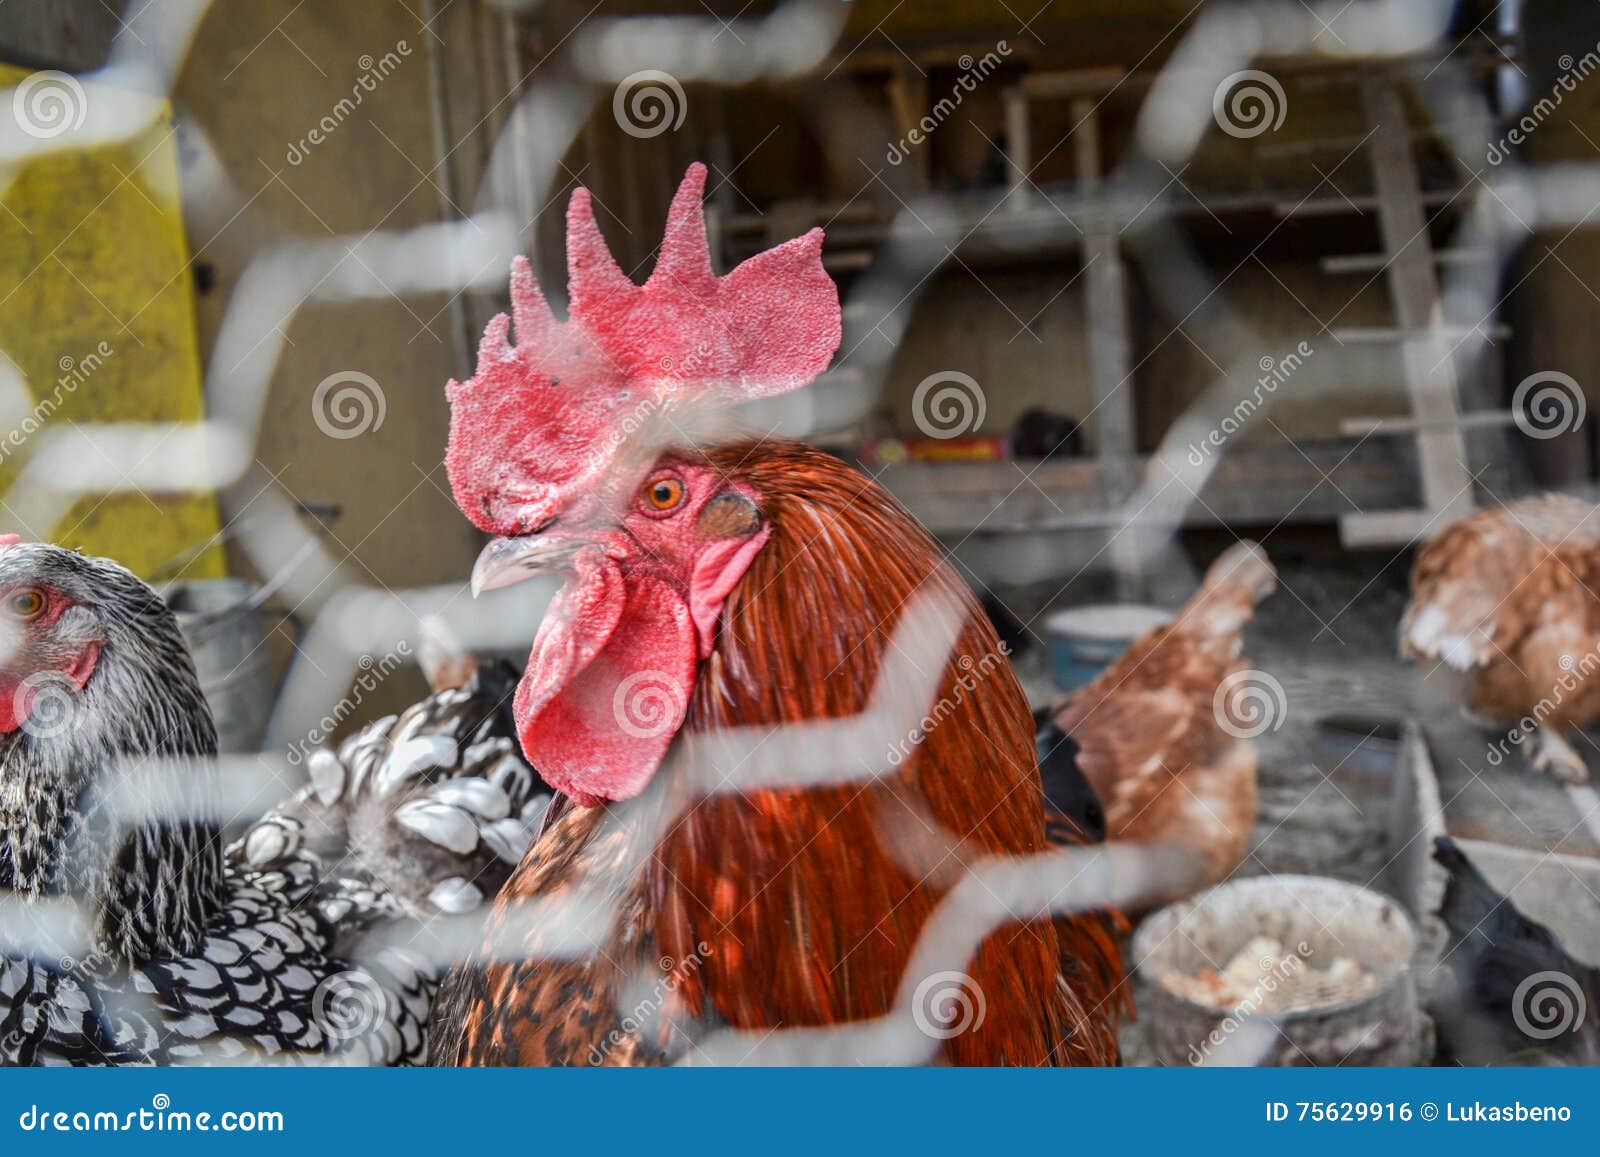 Caged Rooster And Hens In Chicken Coop. Close Up Of Red ...